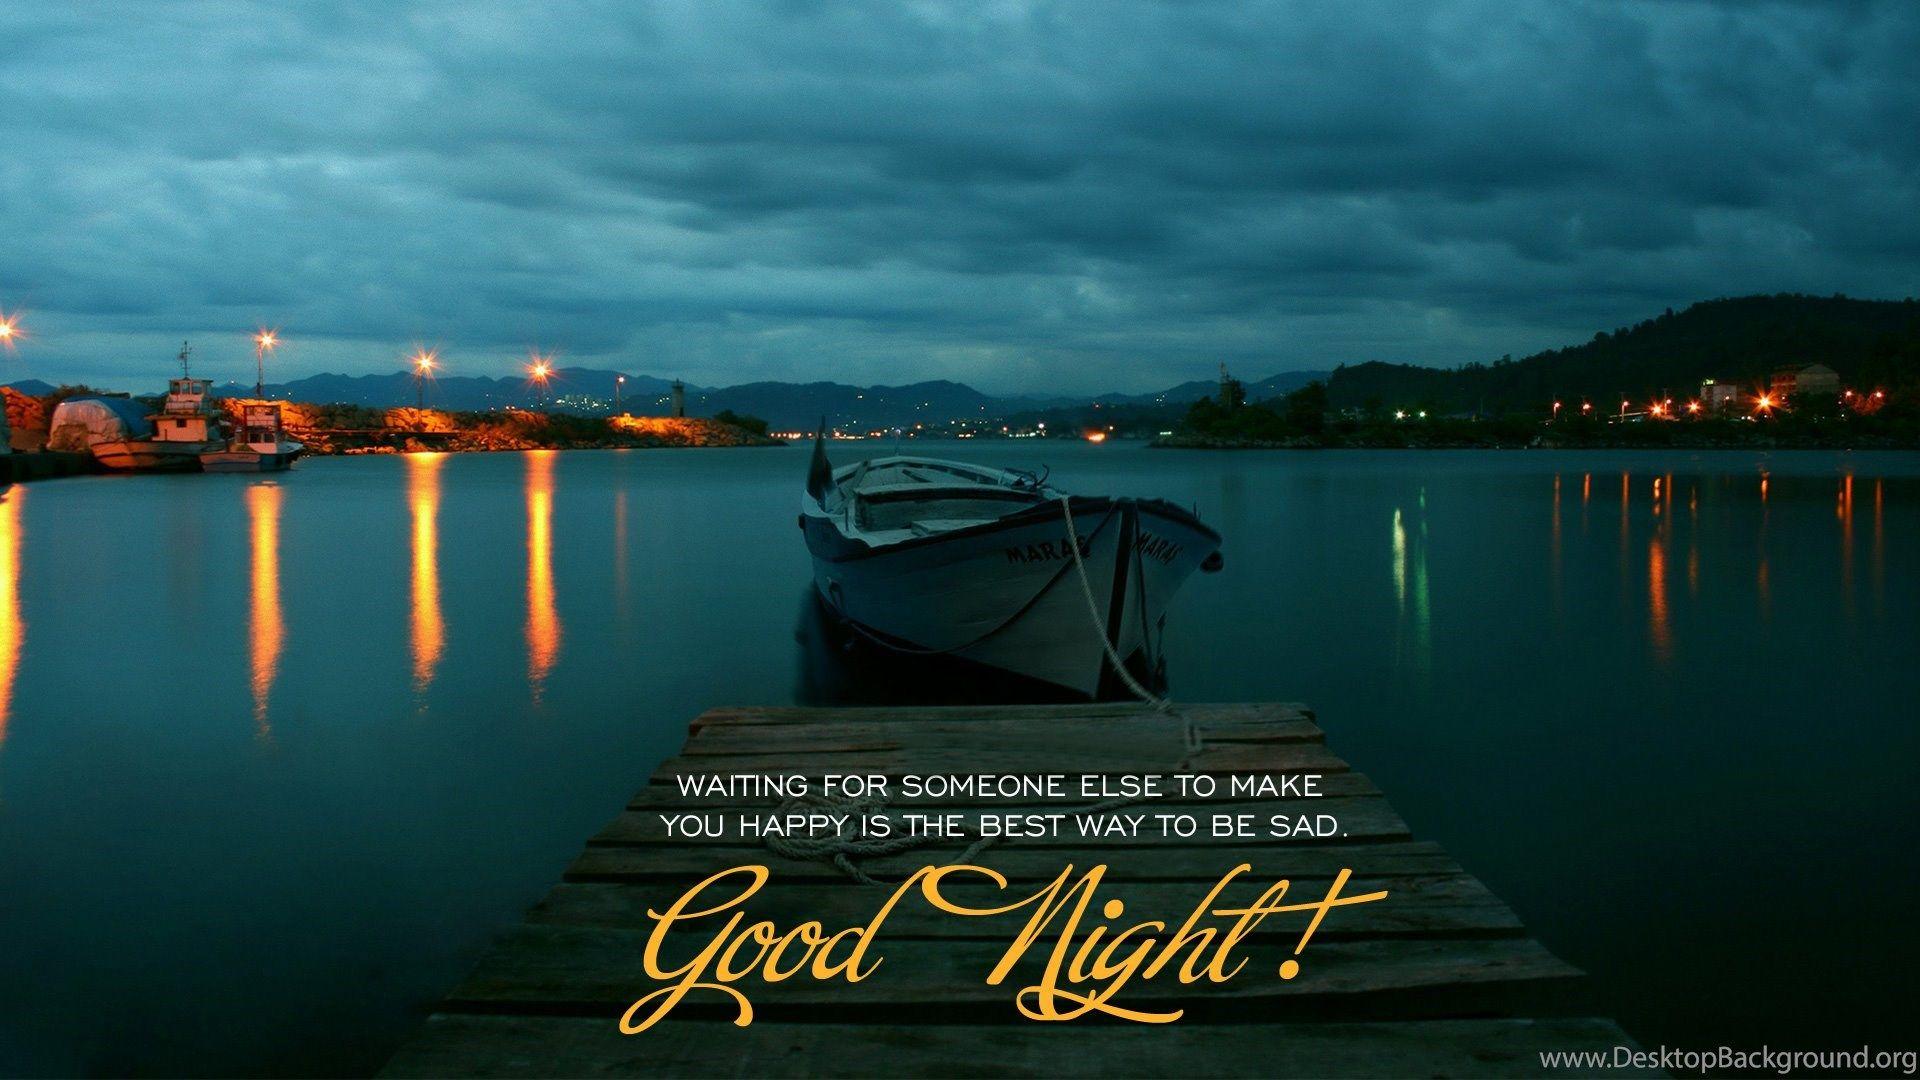 Good Night Wallpapers In HD - Wallpaper Cave